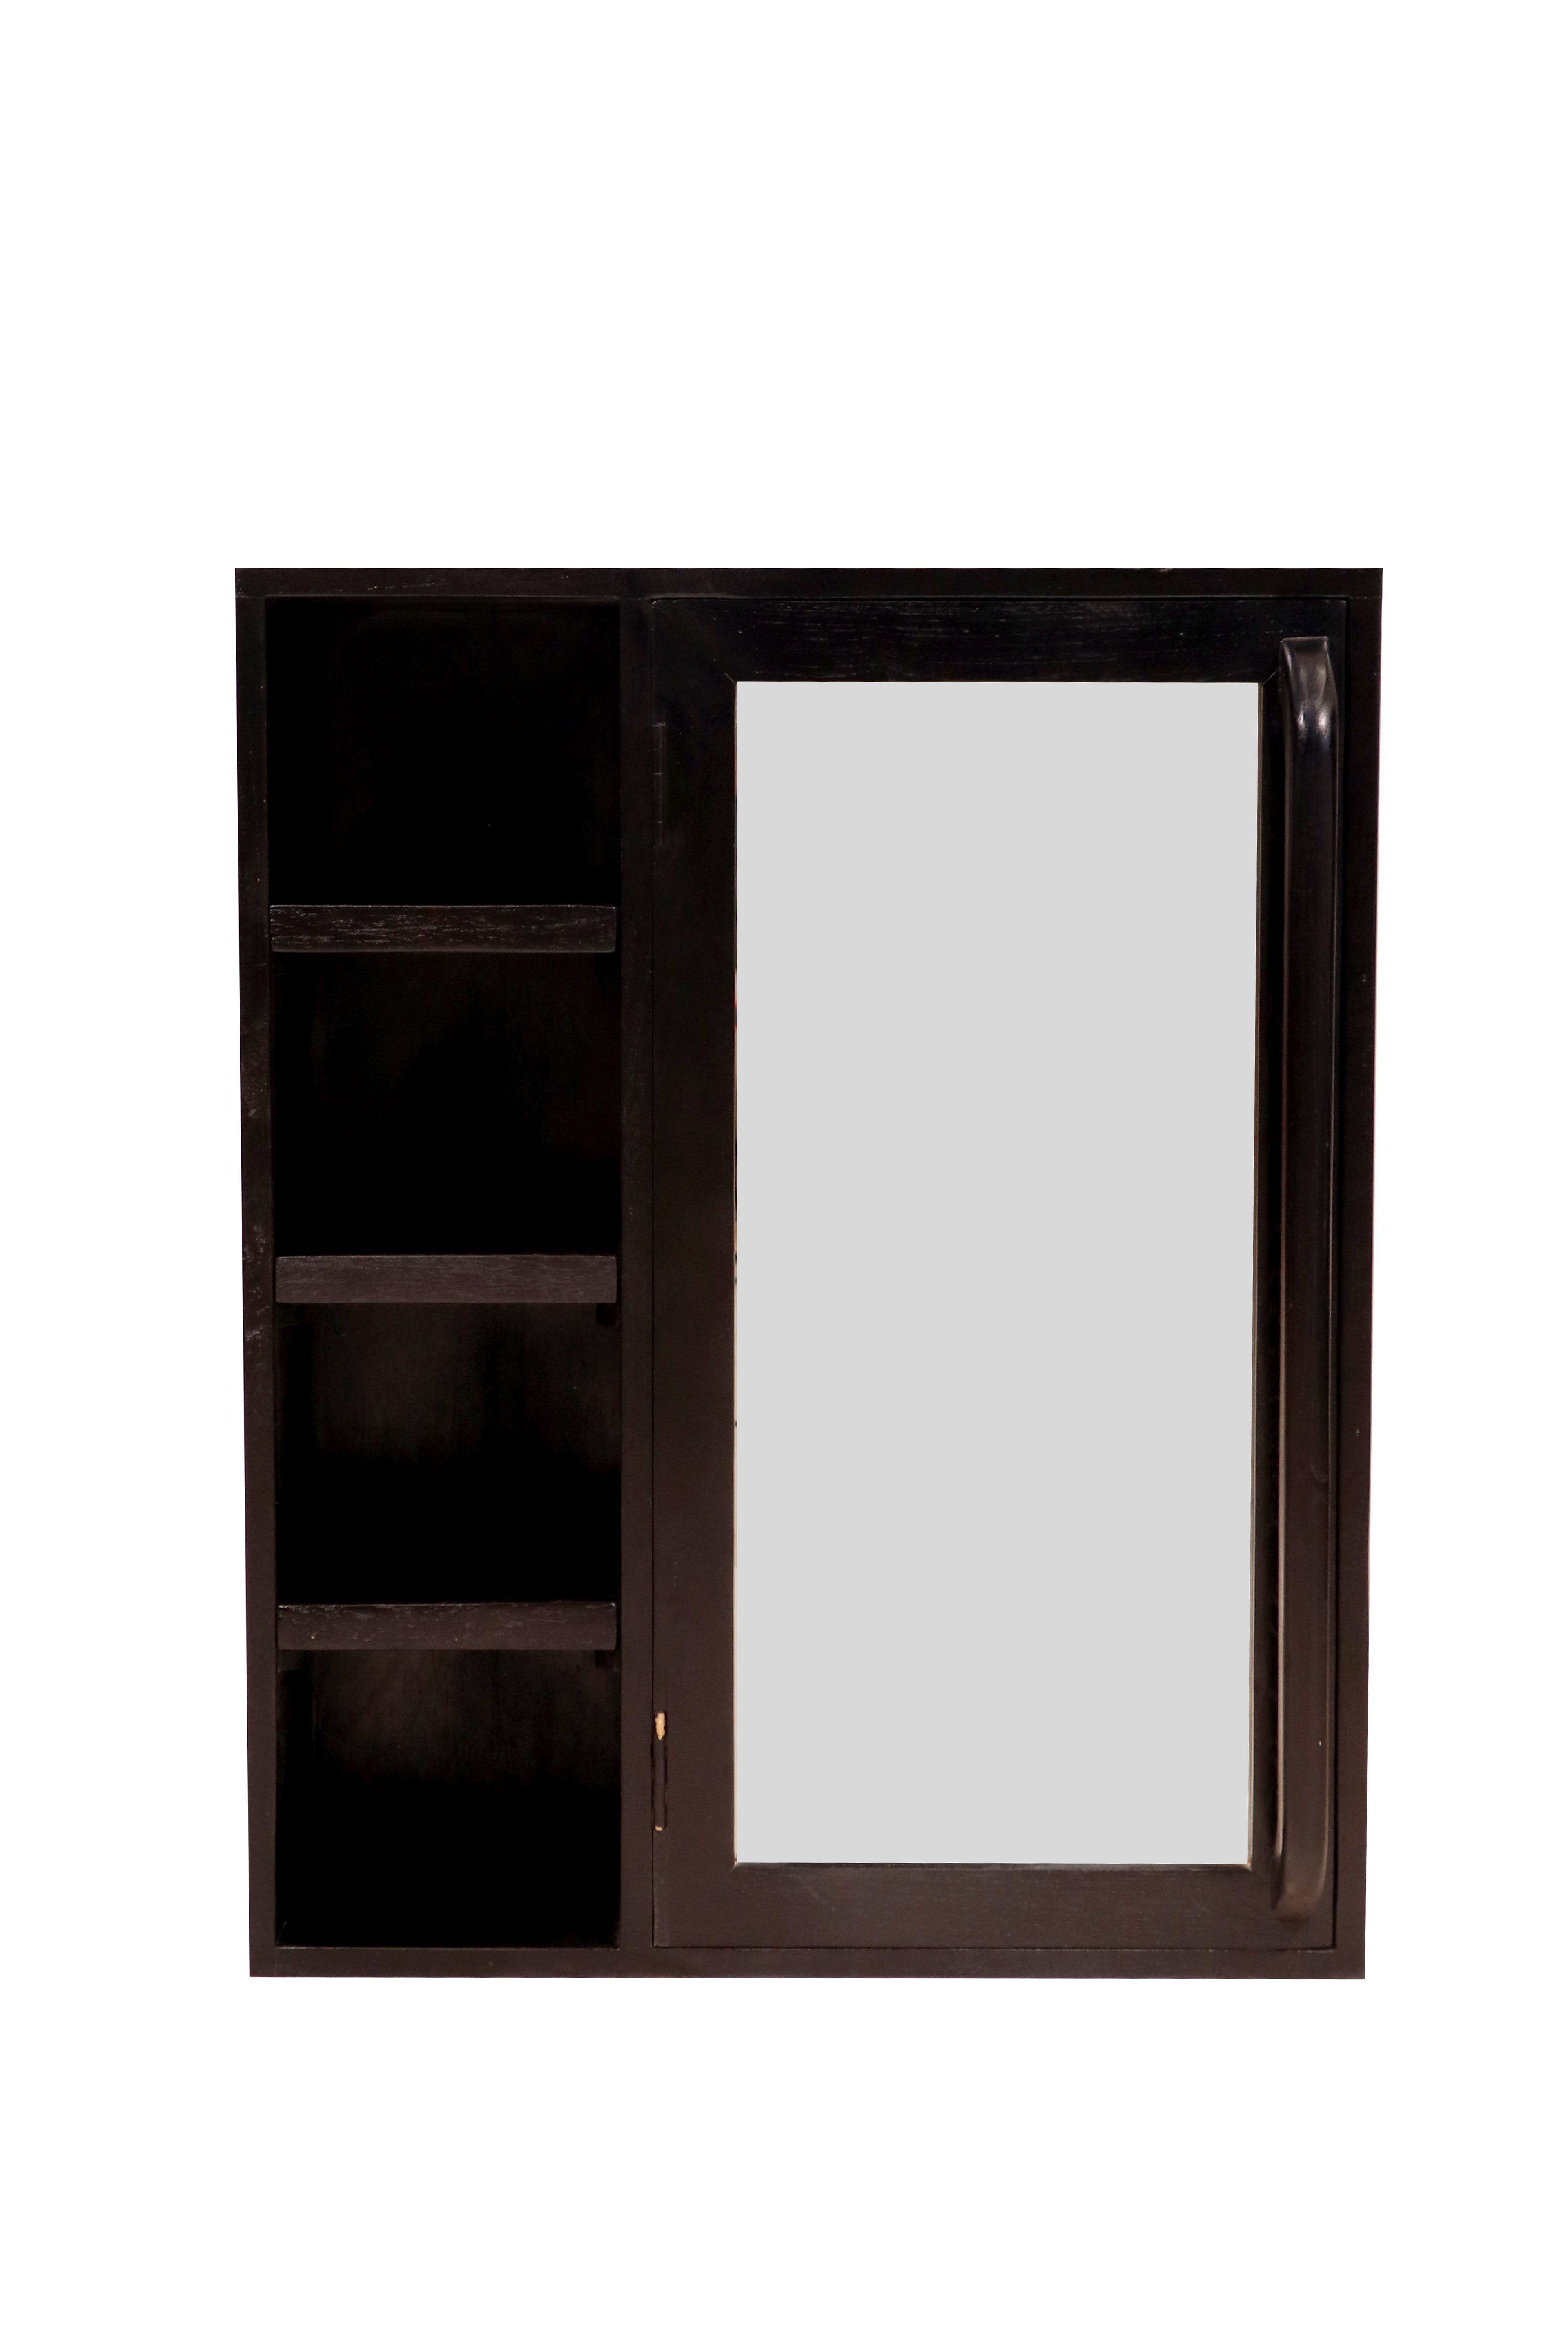 Denver Dark Polished Handmade Mirror & Wooden Wall Cabinet for Home Wall Cabinet